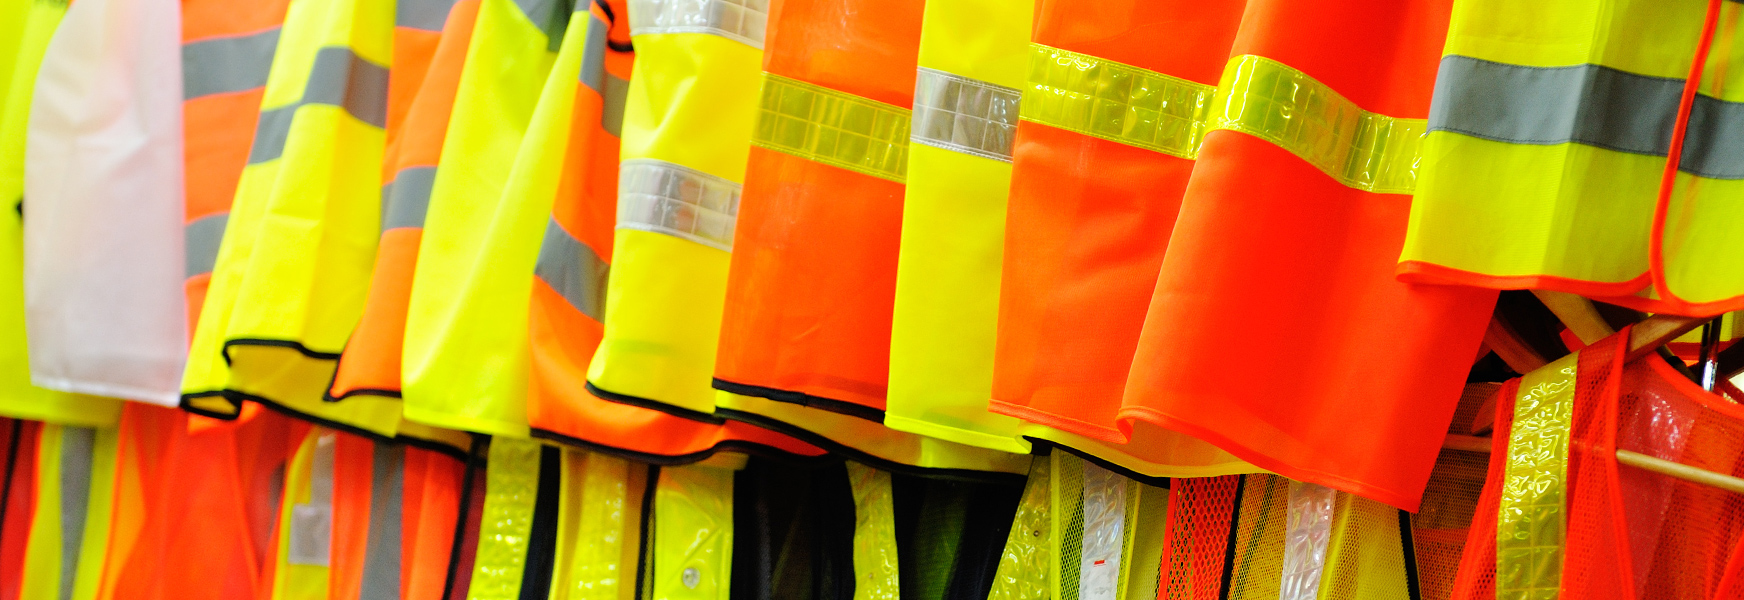 Orange and yellow safety vests hanging on a rack